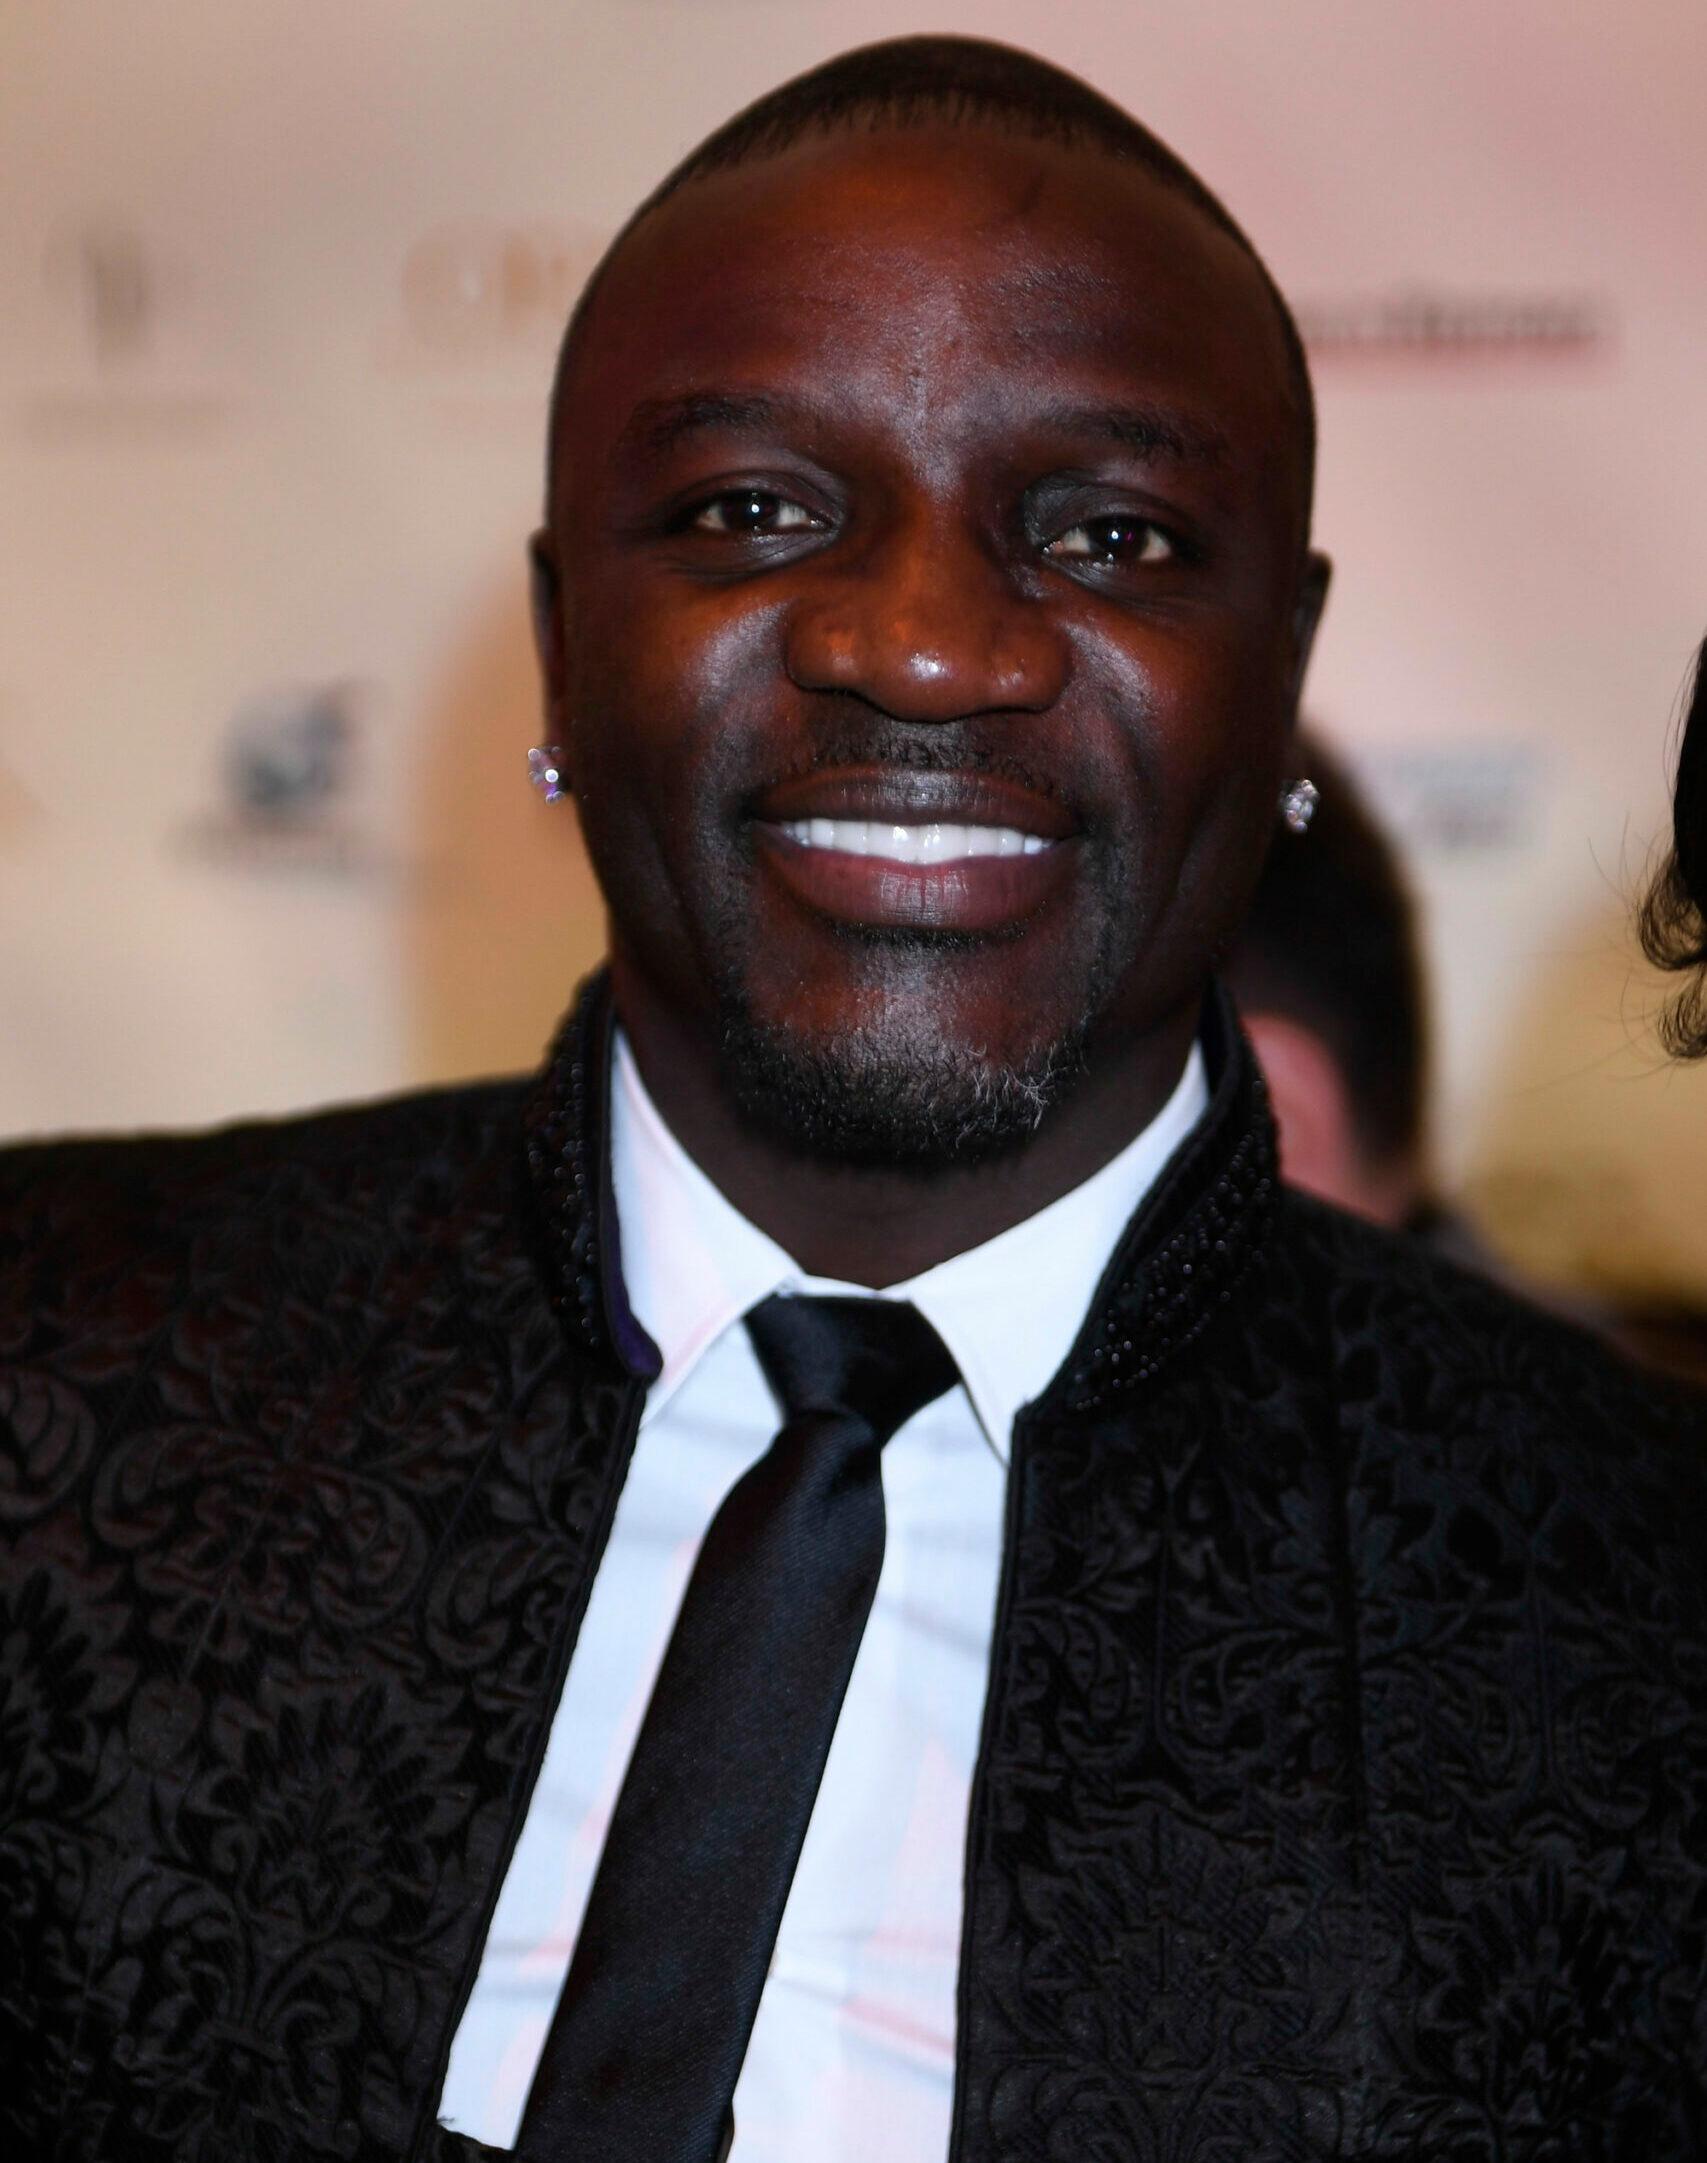 Akon admires Nick Cannon for having lots of babies